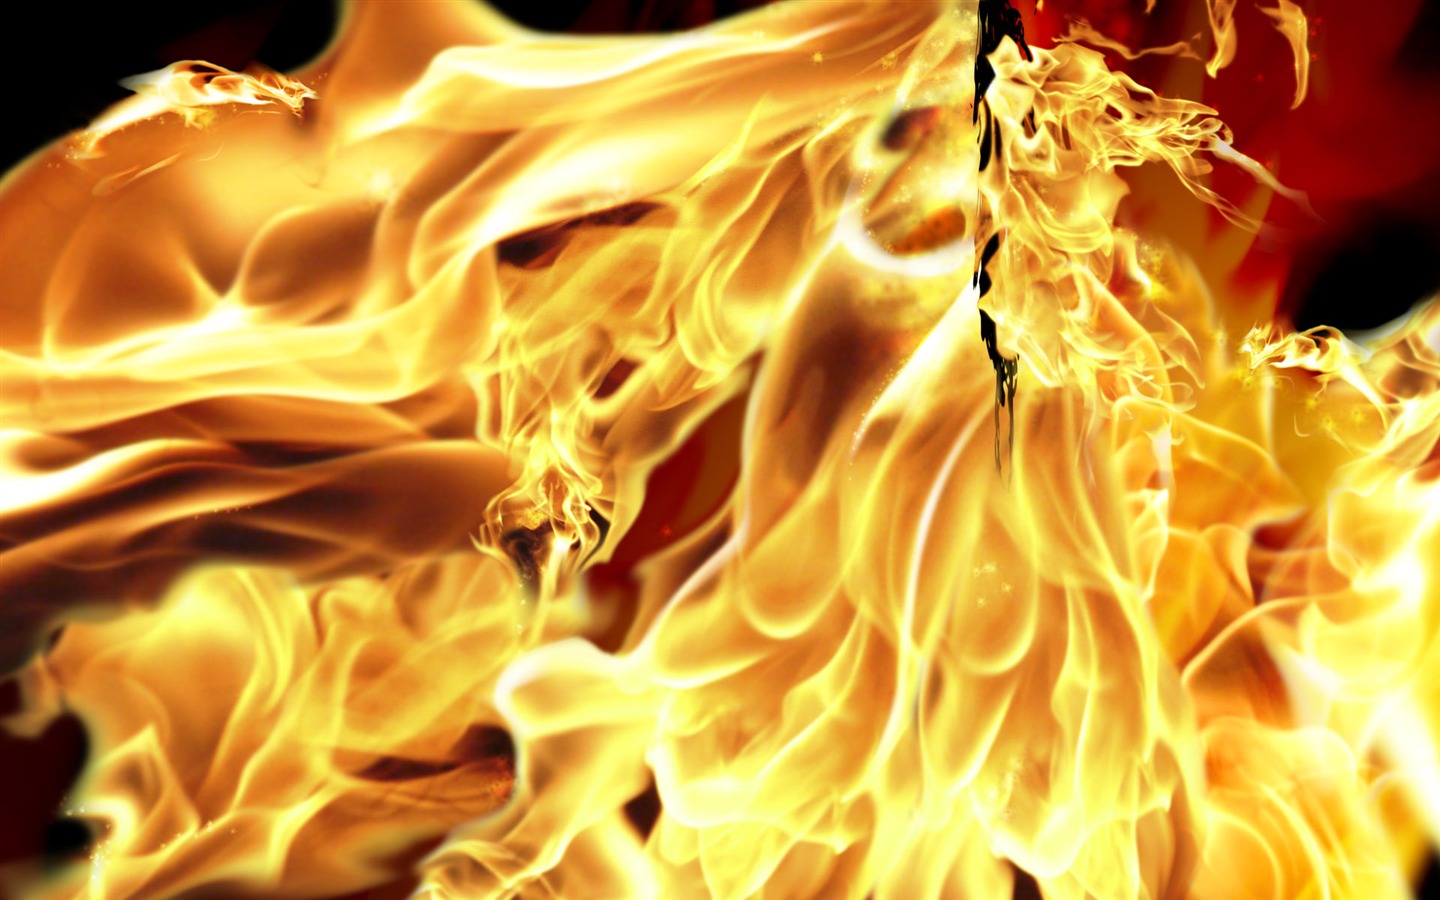 Flame Feature HD Wallpaper #2 - 1440x900